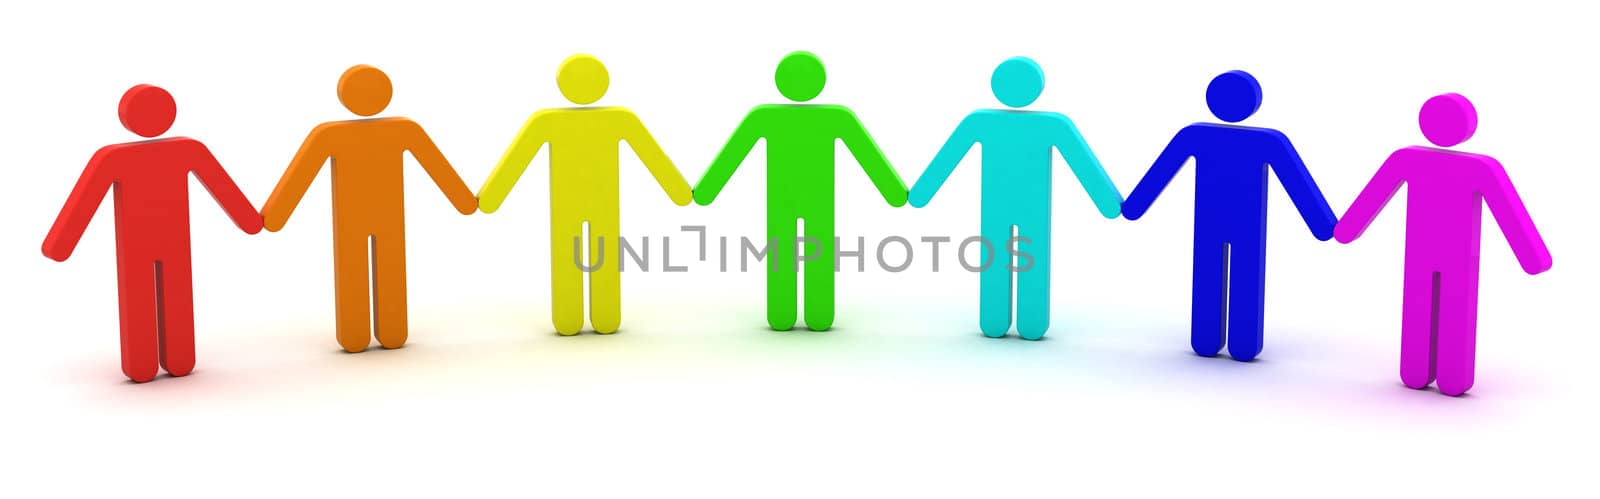 Group of people standing in a row. 3d objects isolated on the white background.